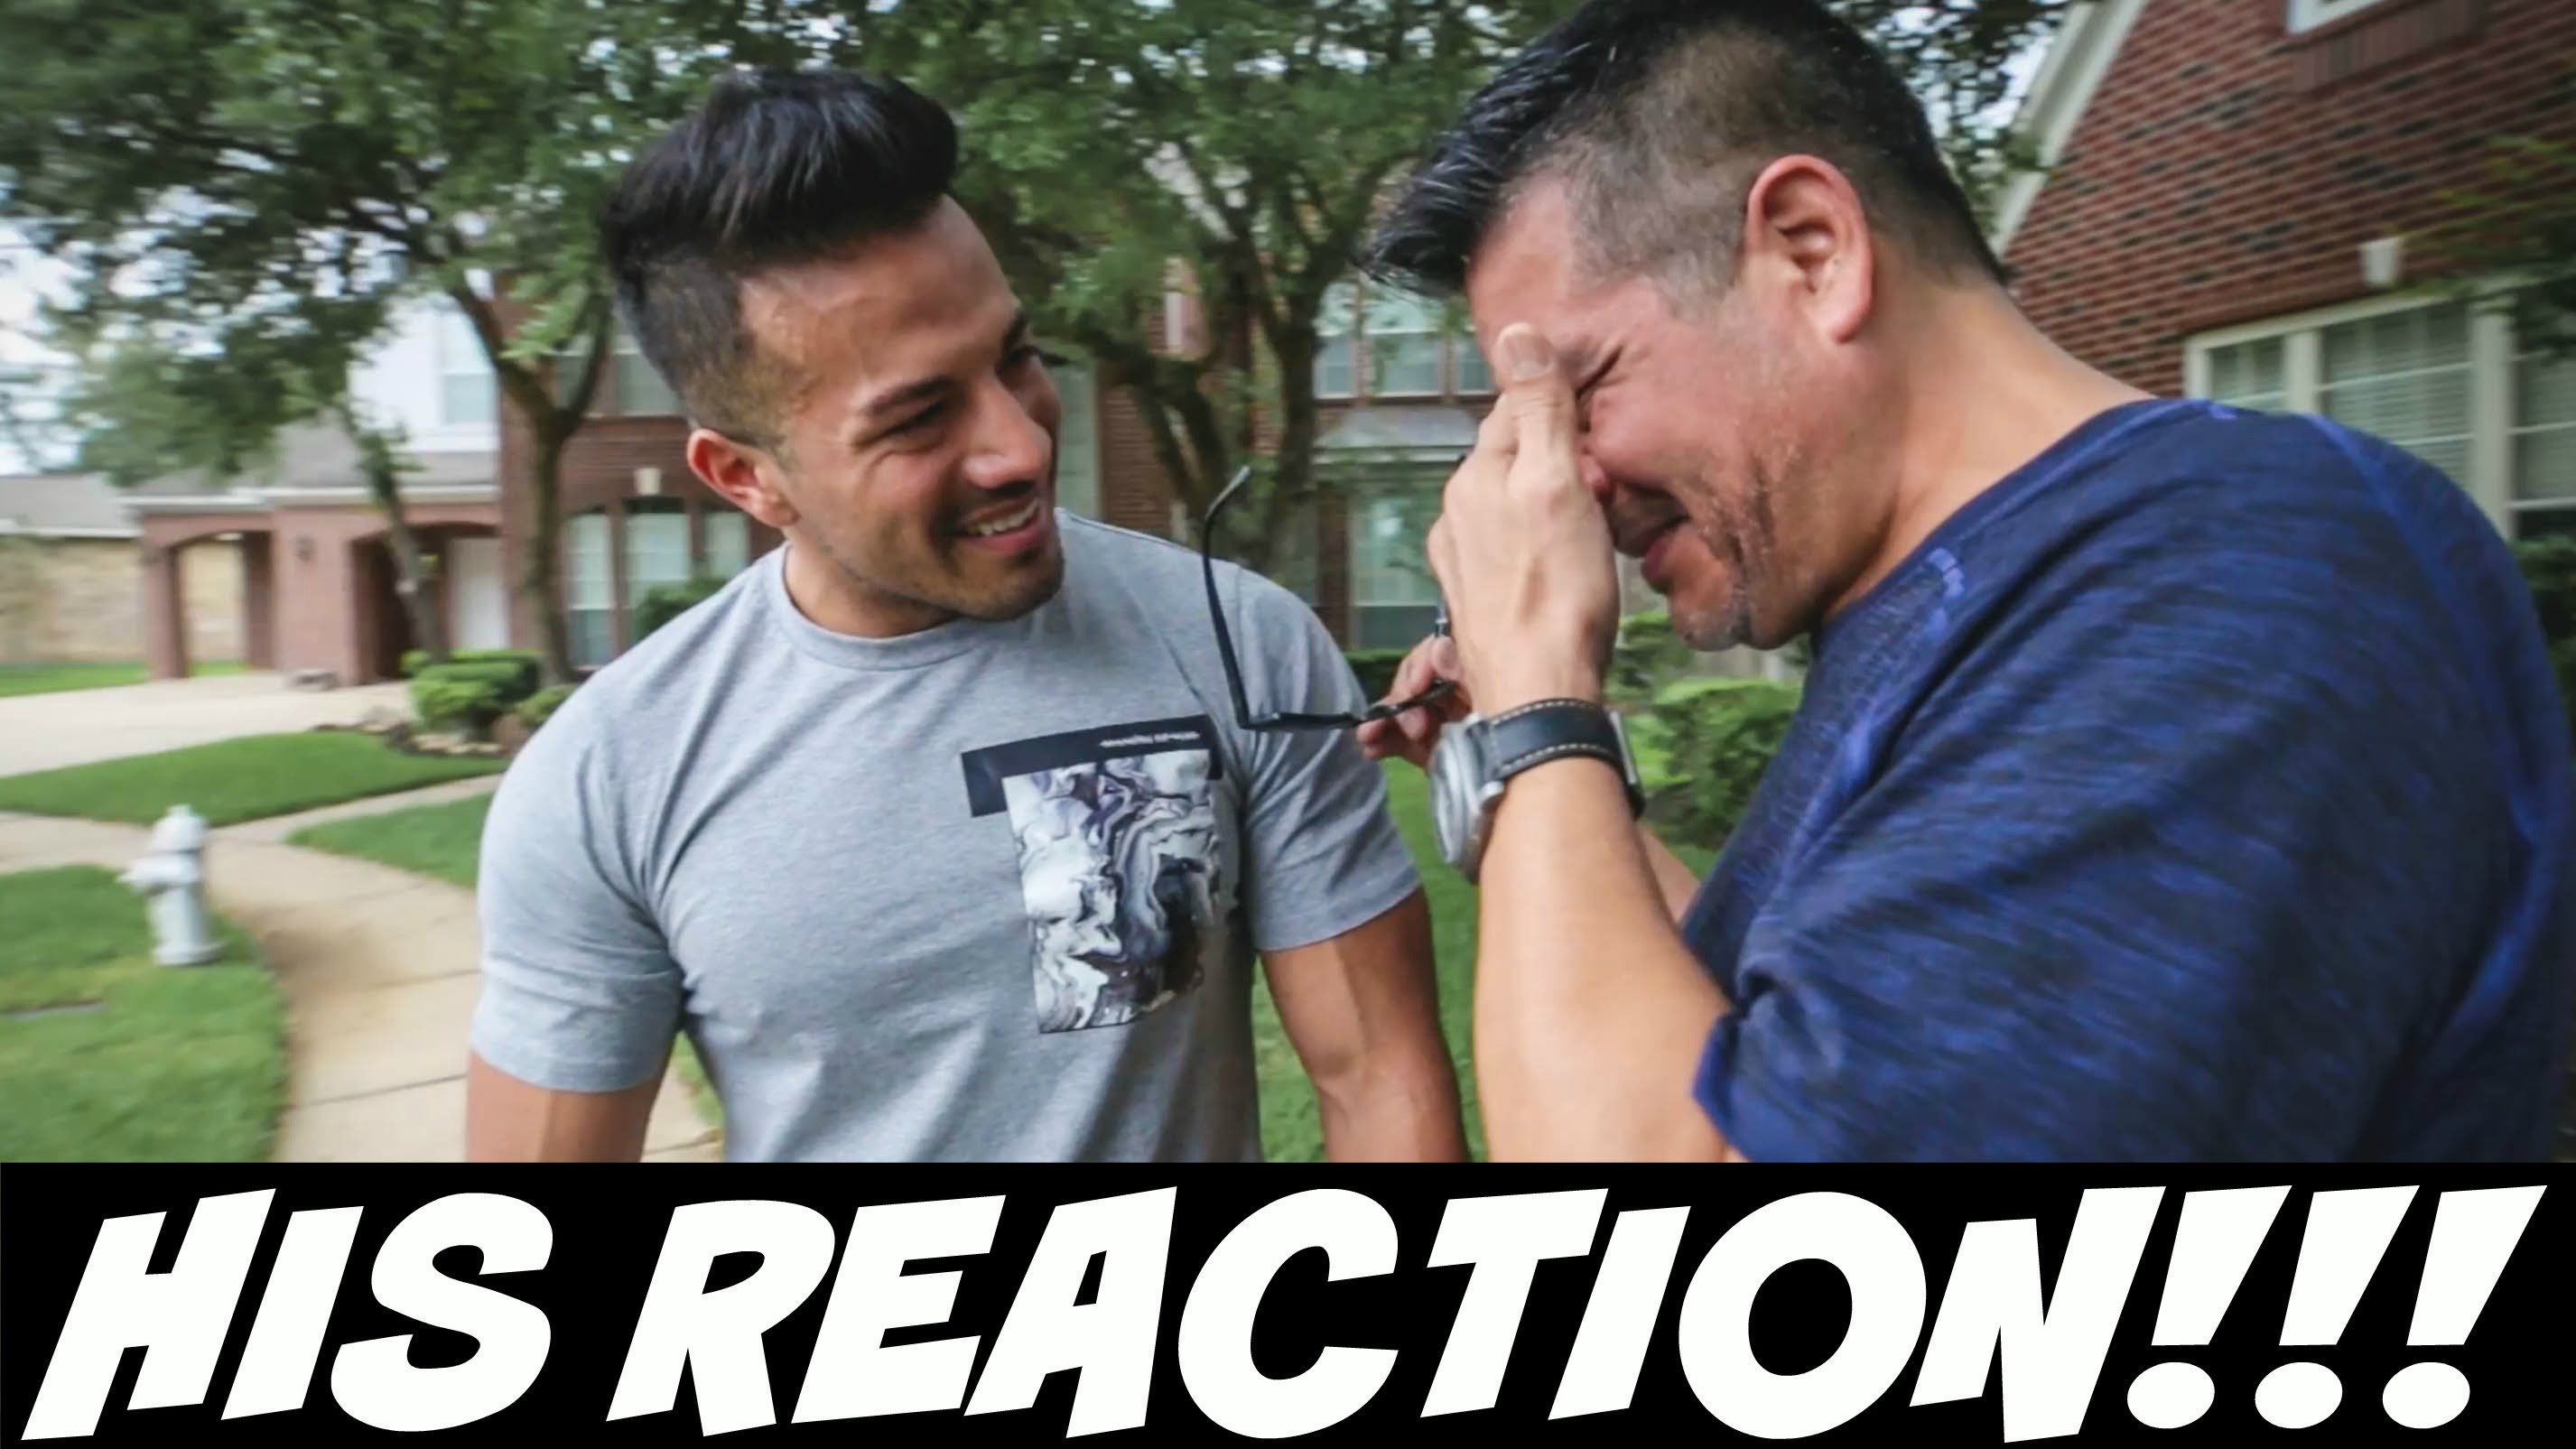 I Bought My Dad A Car... This is His Reaction!!!